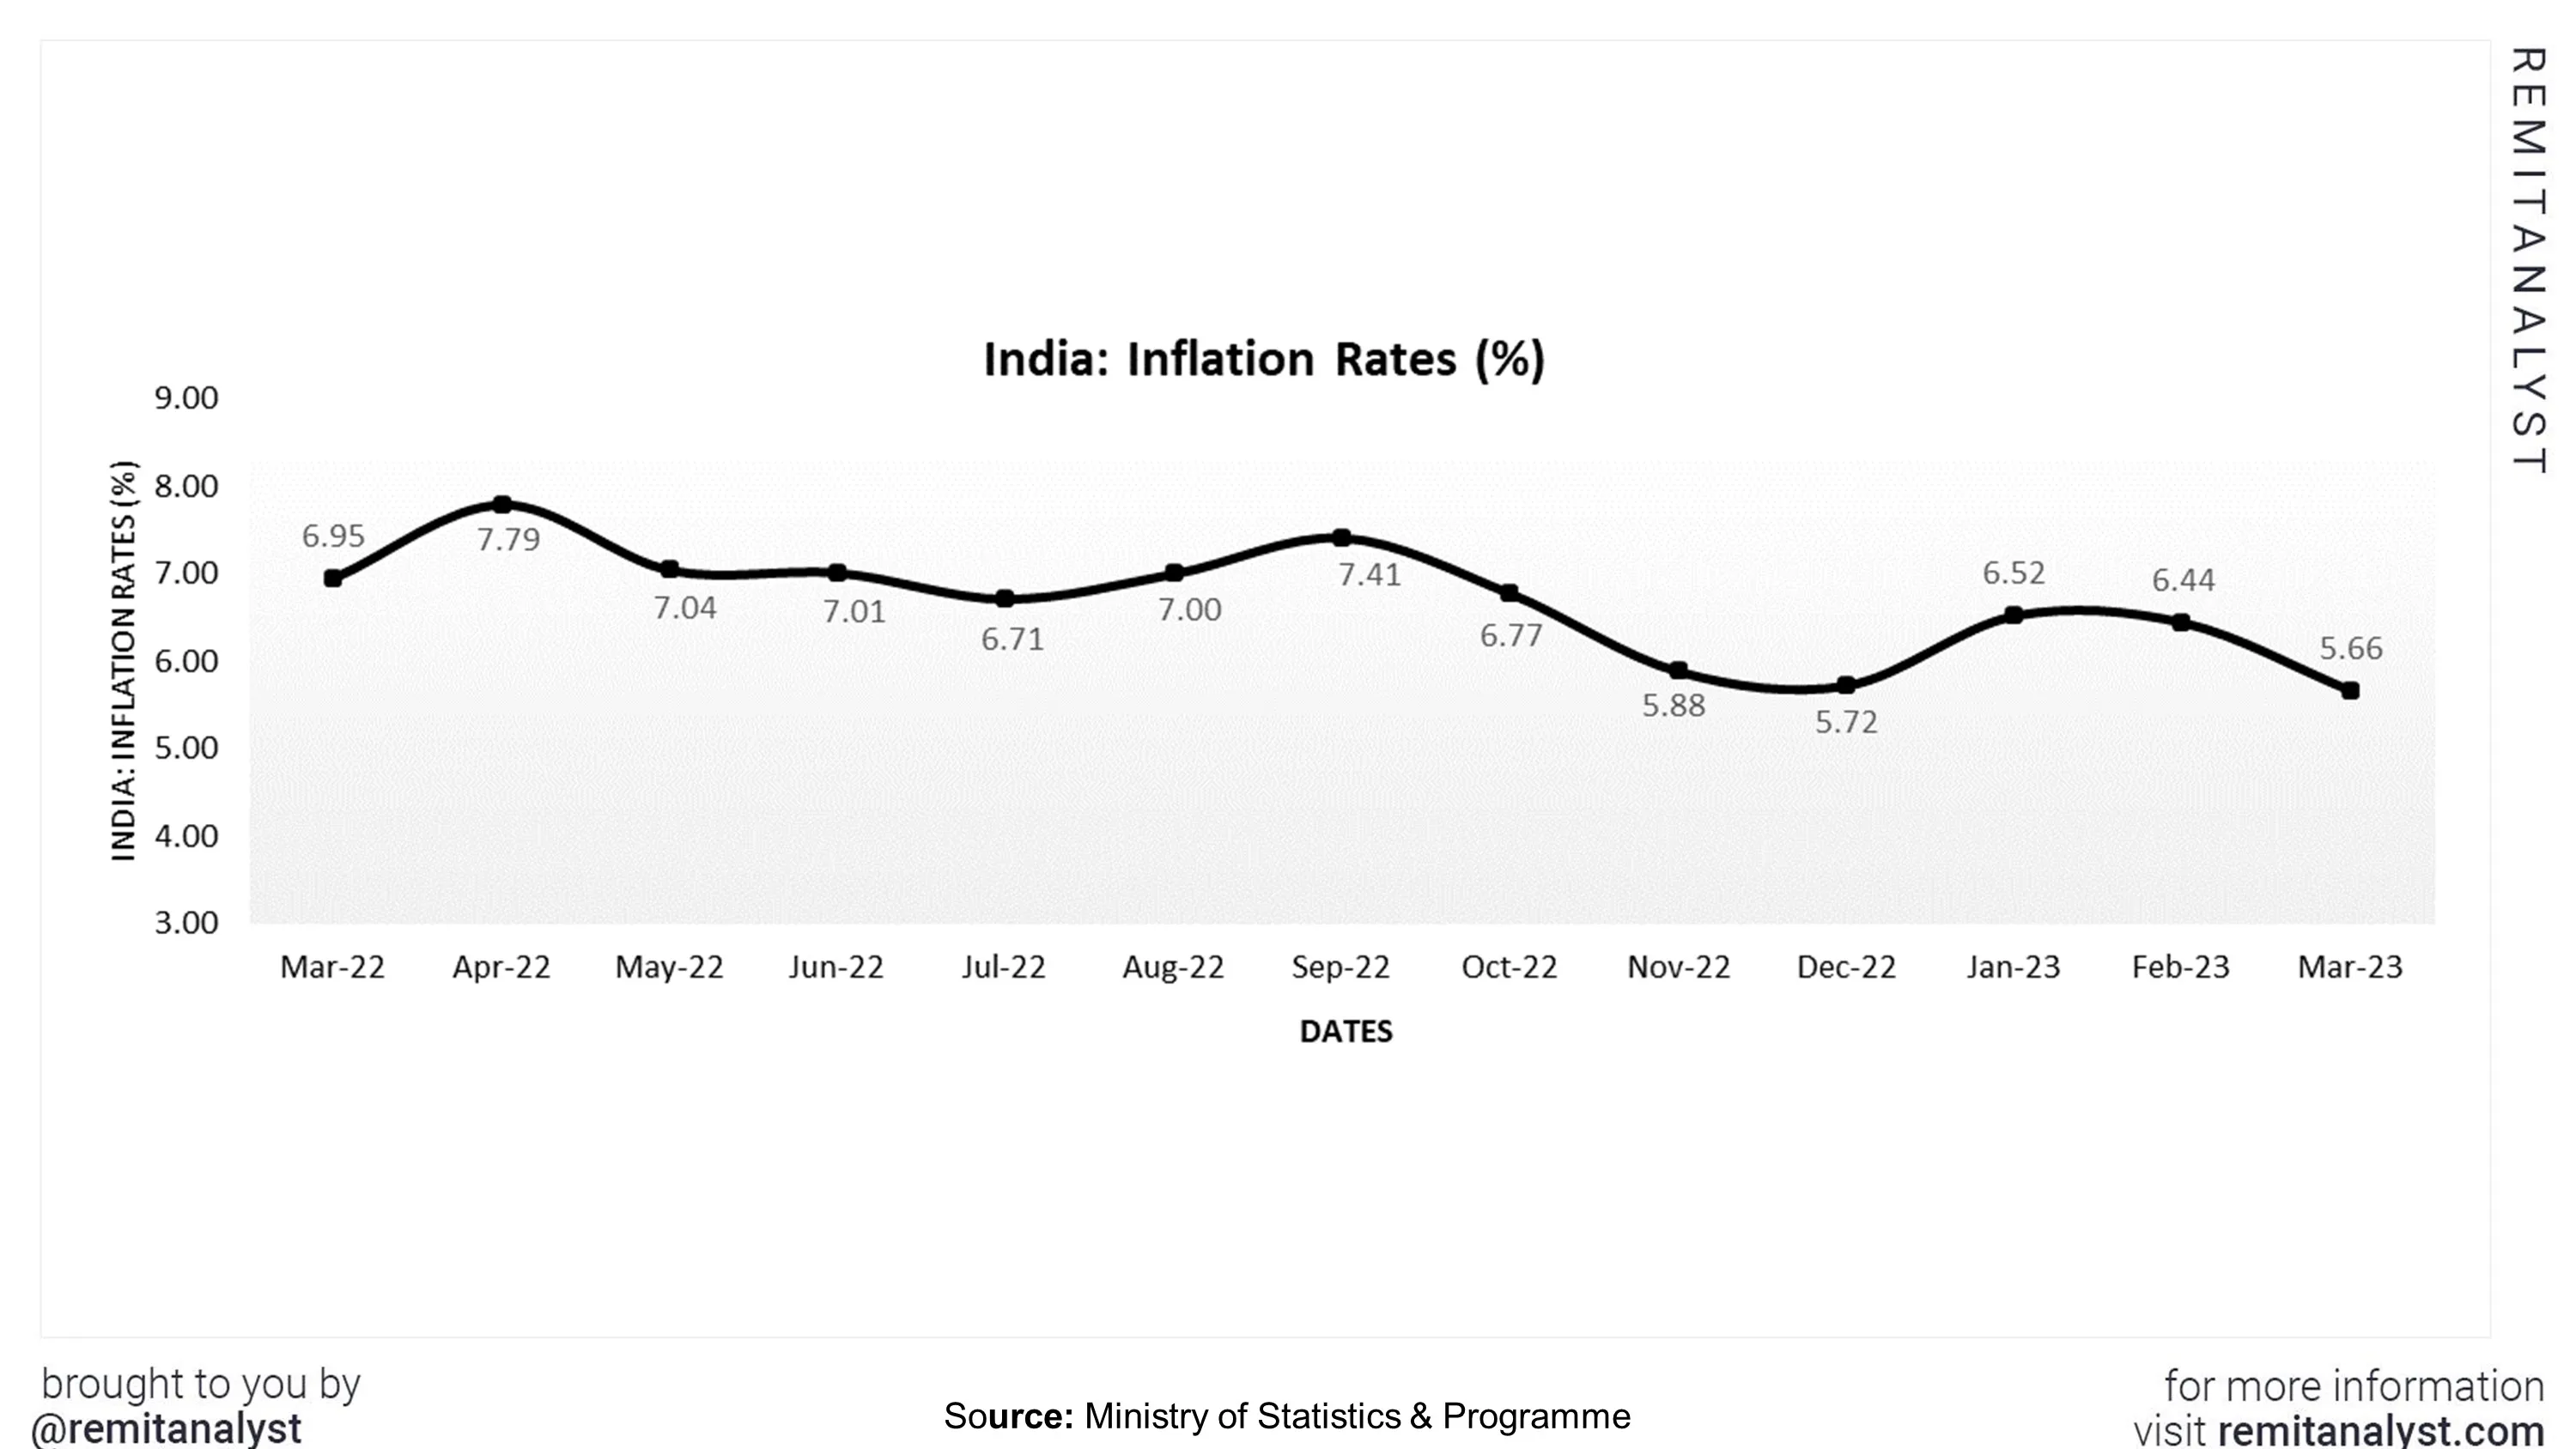 inflation-rates-india-from-mar-2022-to-mar-2023